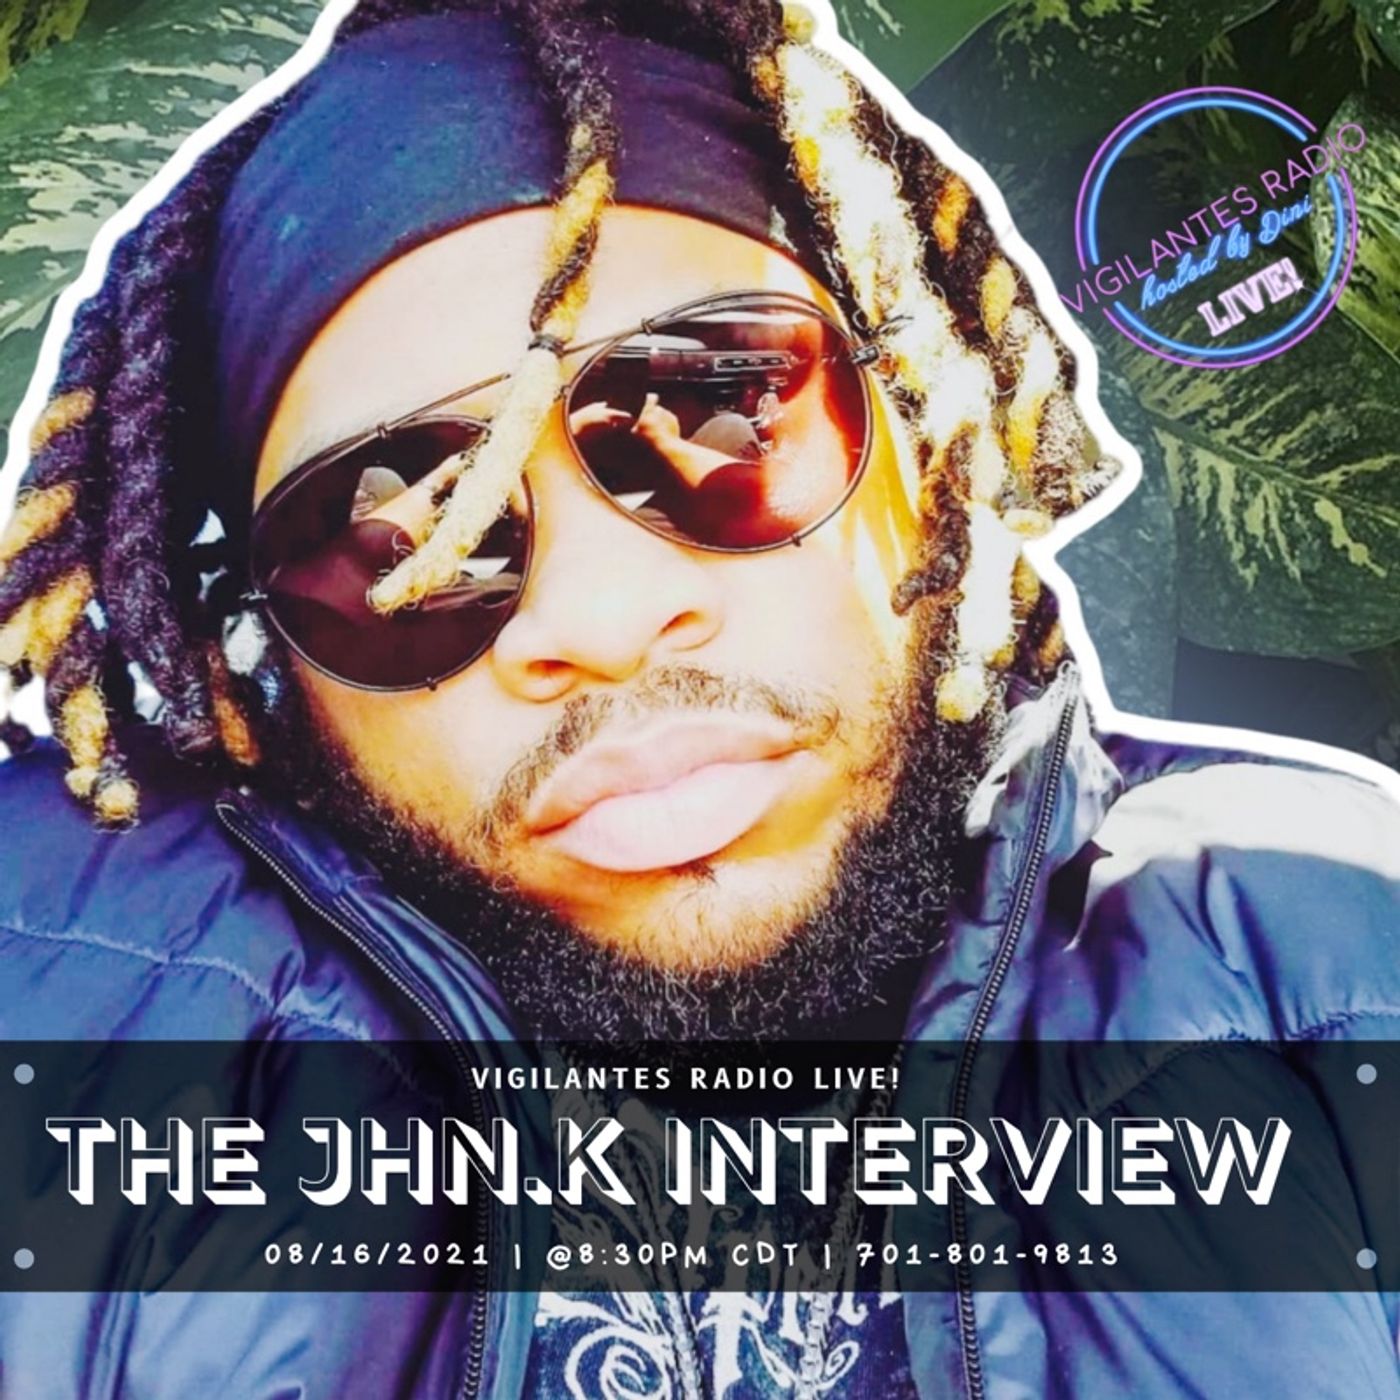 The Jhn.K Interview. Image